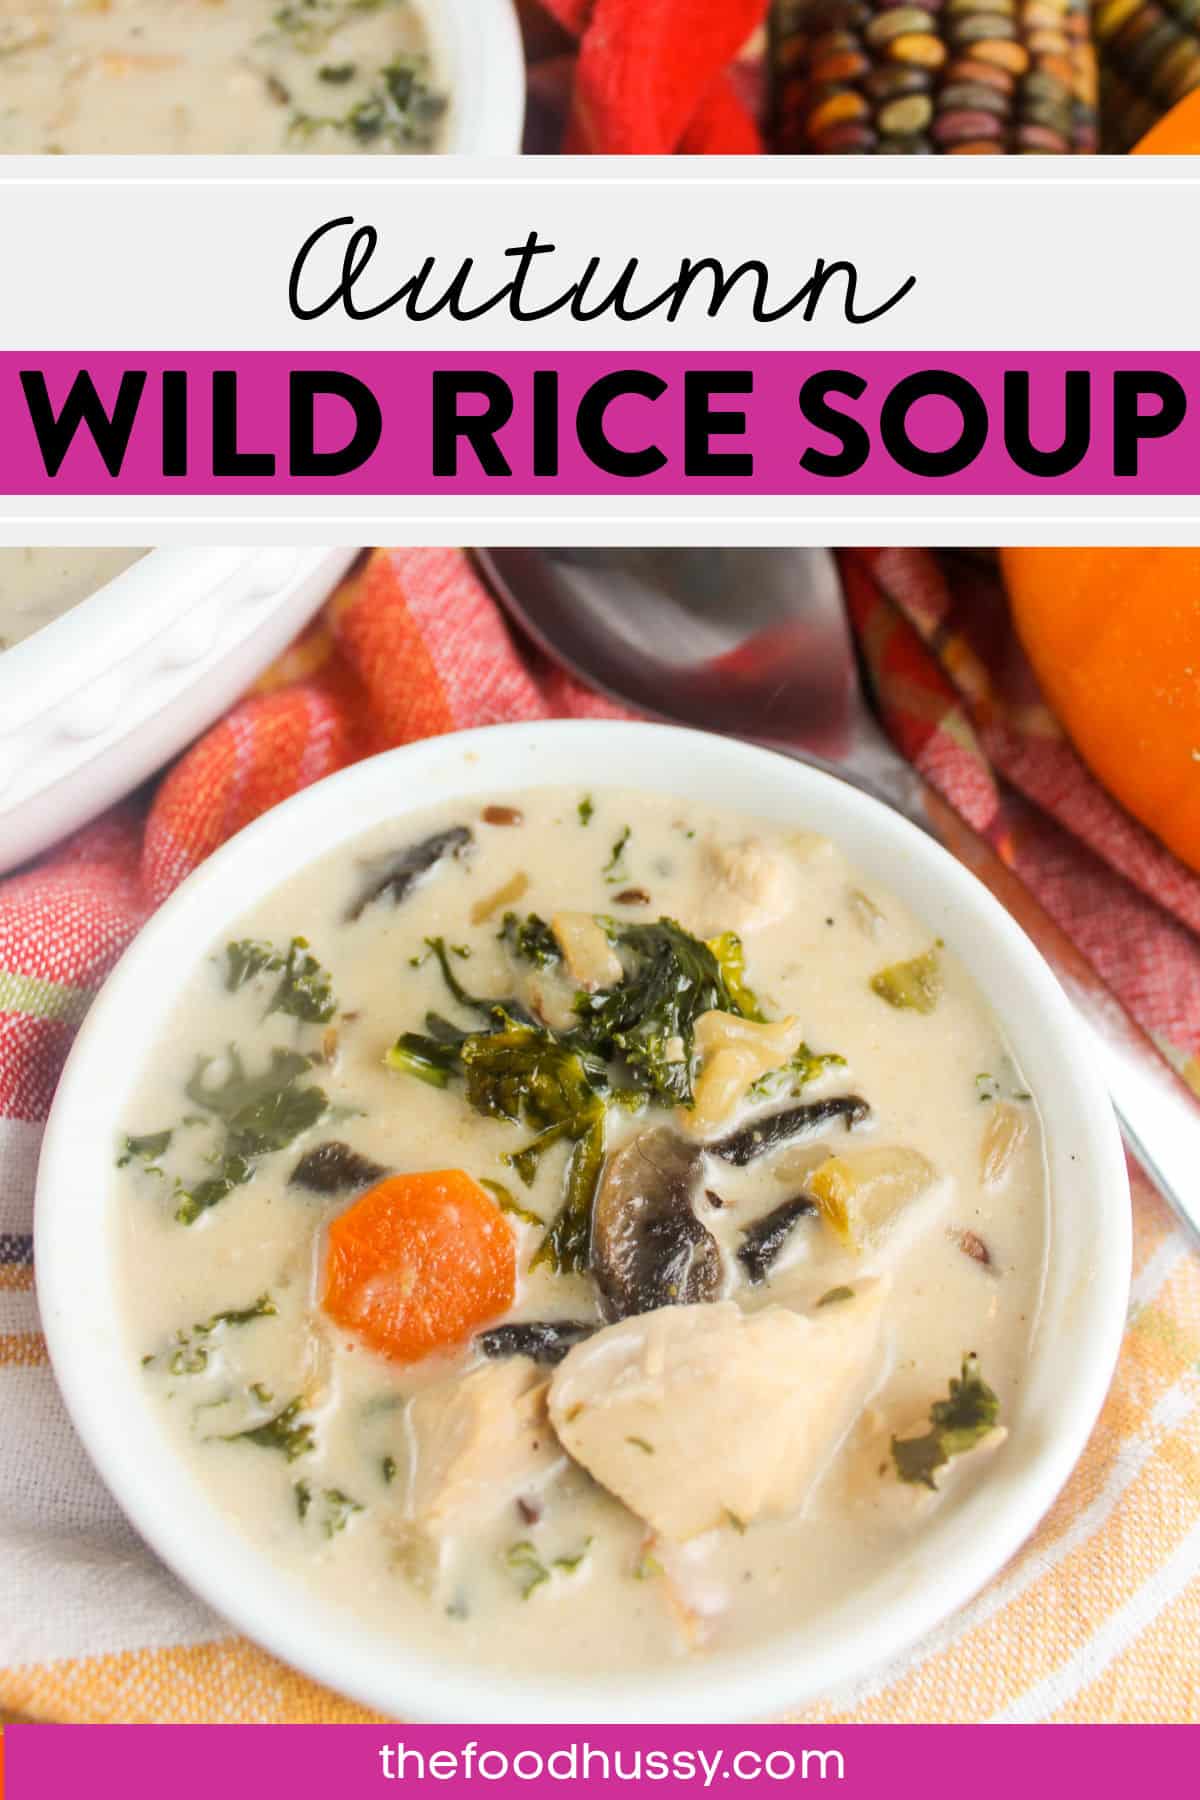 This Creamy Autumn Wild Rice Soup is absolutely the perfect step into fall we all need! It starts with tender chicken, LOTS of veggies, including sweet potato, kale and mushrooms, and finishes with chicken broth and cream - for a perfectly balanced comforting bowl of yum!  via @foodhussy